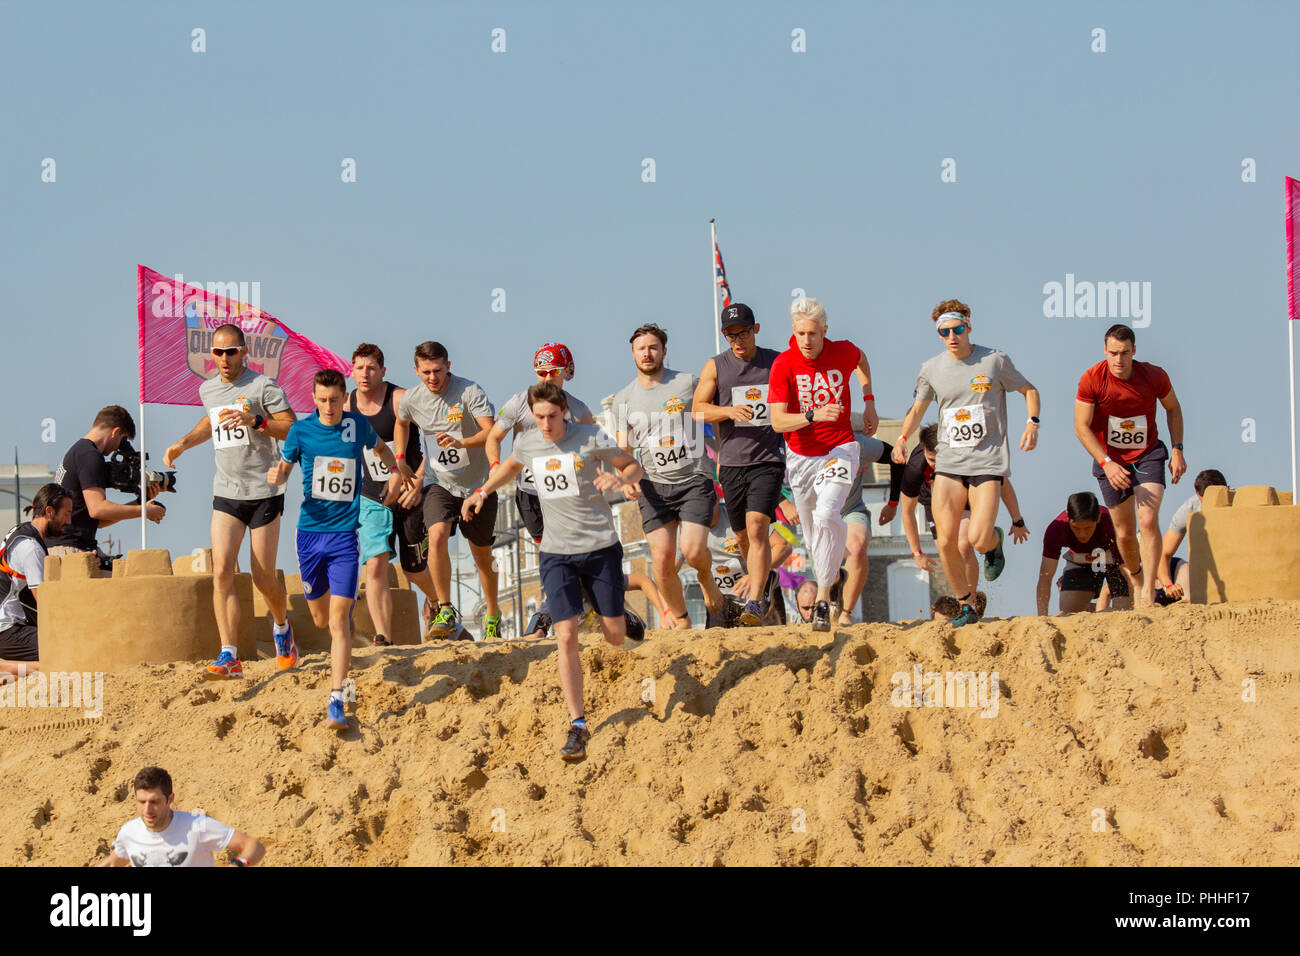 Margate, Kent, UK. 1st September, 2018. Red Bull has brought 'Quicksand' to the seaside town of Margate. An endurance course on the golden sands with castles, hills, trenches and rollers to test the competitors to the point of exhaustion.  How hard can a mile be? Credit: ernie jordan/Alamy Live News Stock Photo